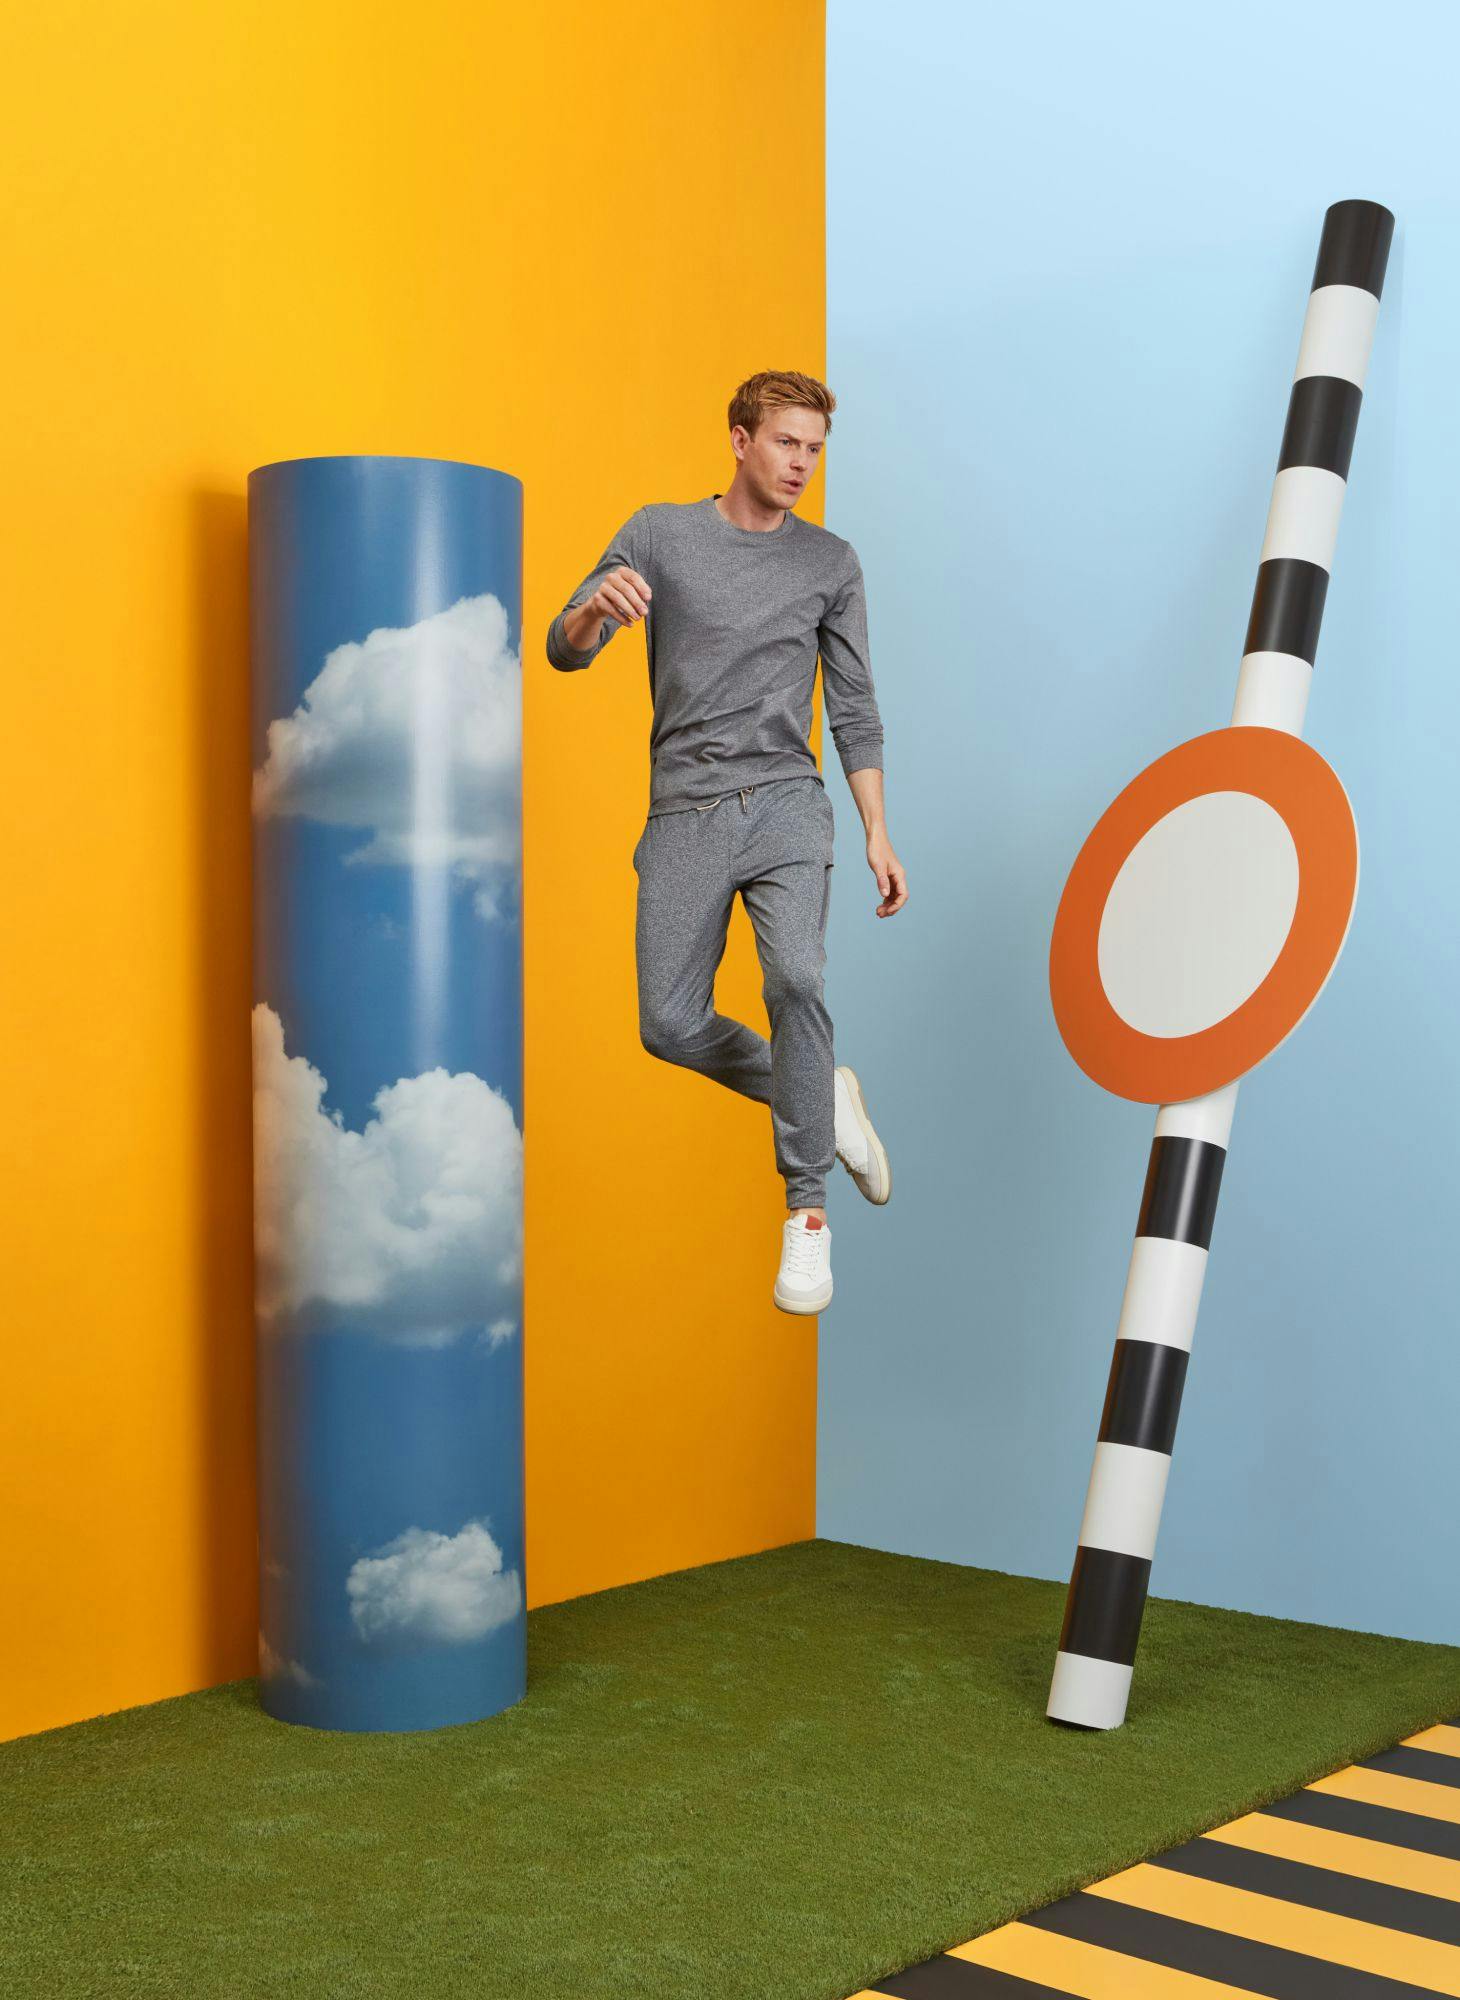 Man in grey activewear jumping against a background of yellow and blue